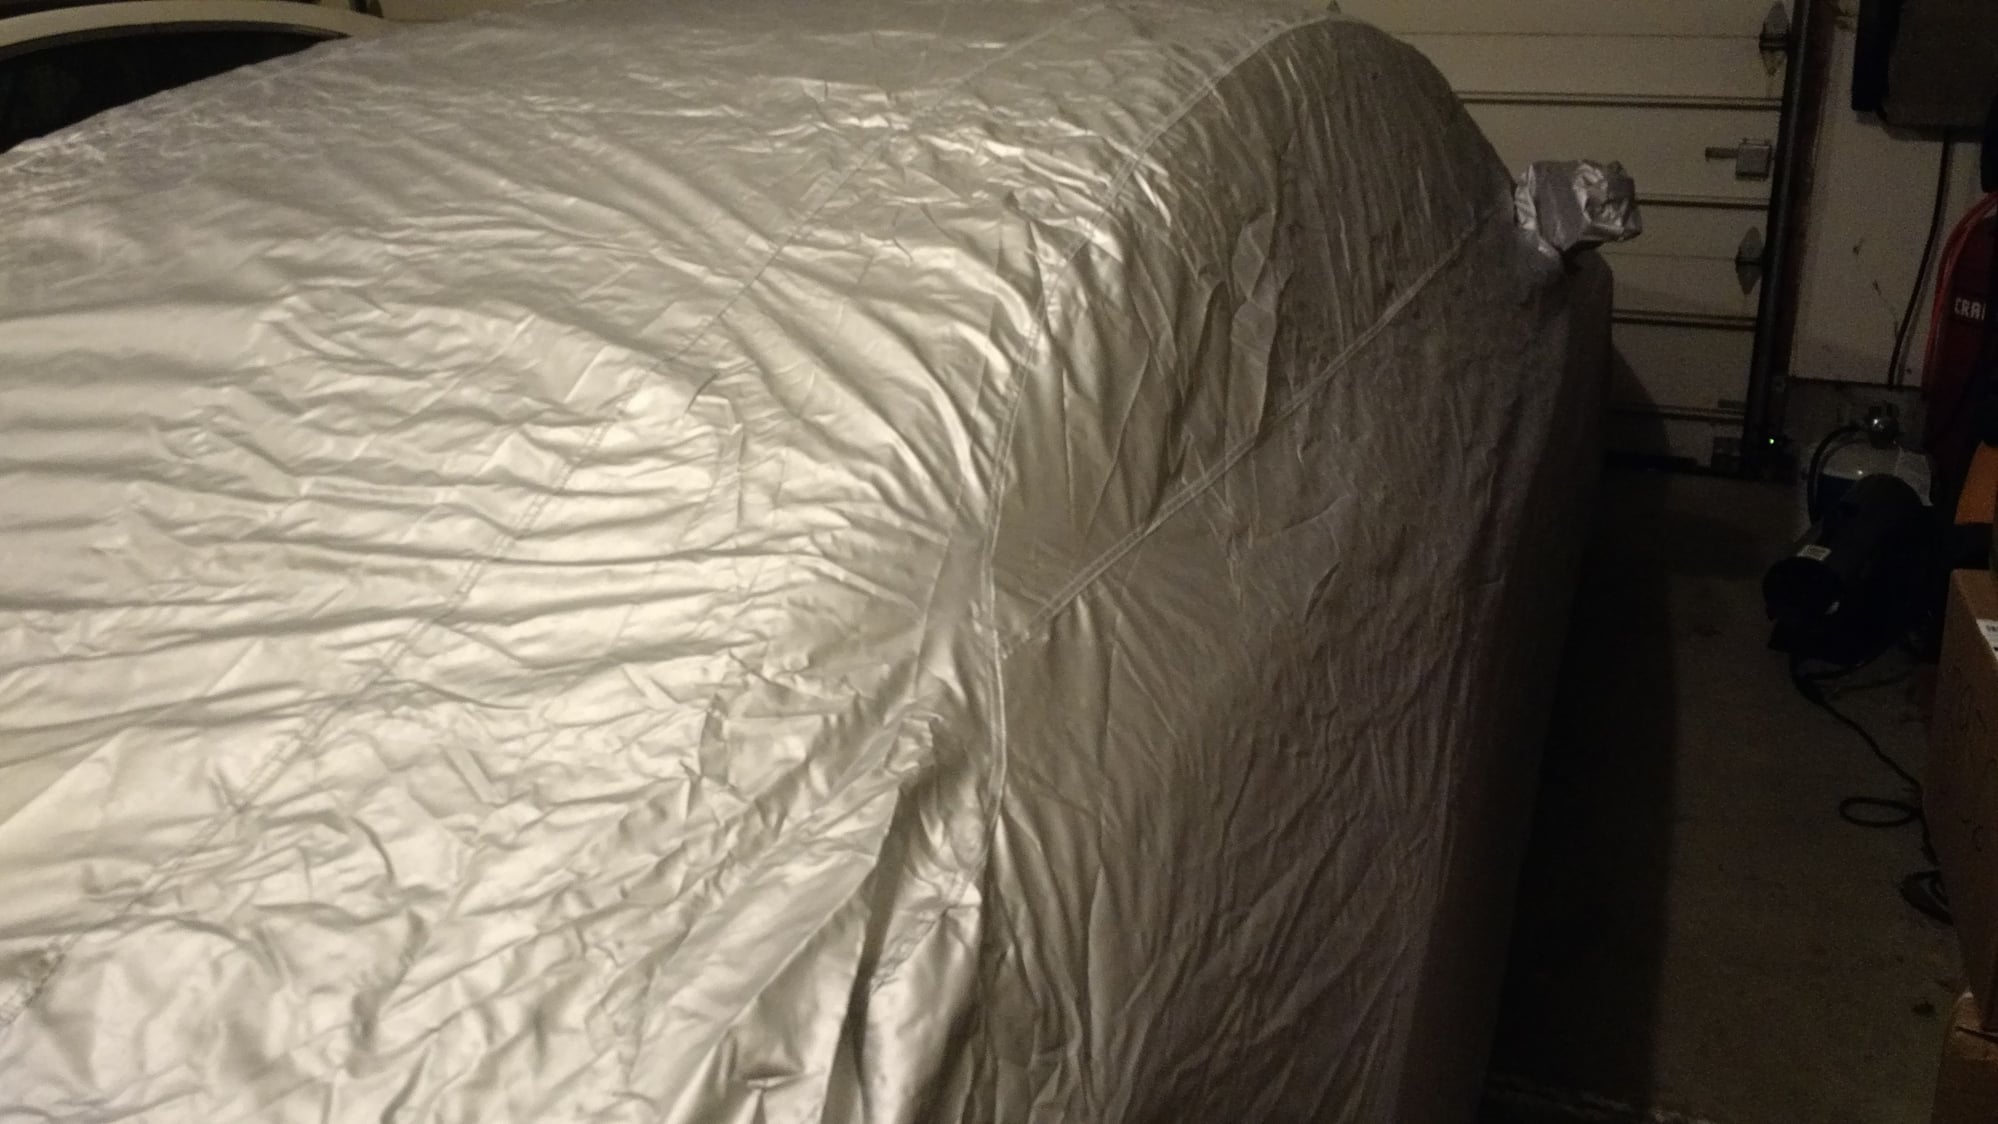 Found a decent indoor/outdoor custom fit car cover for $119